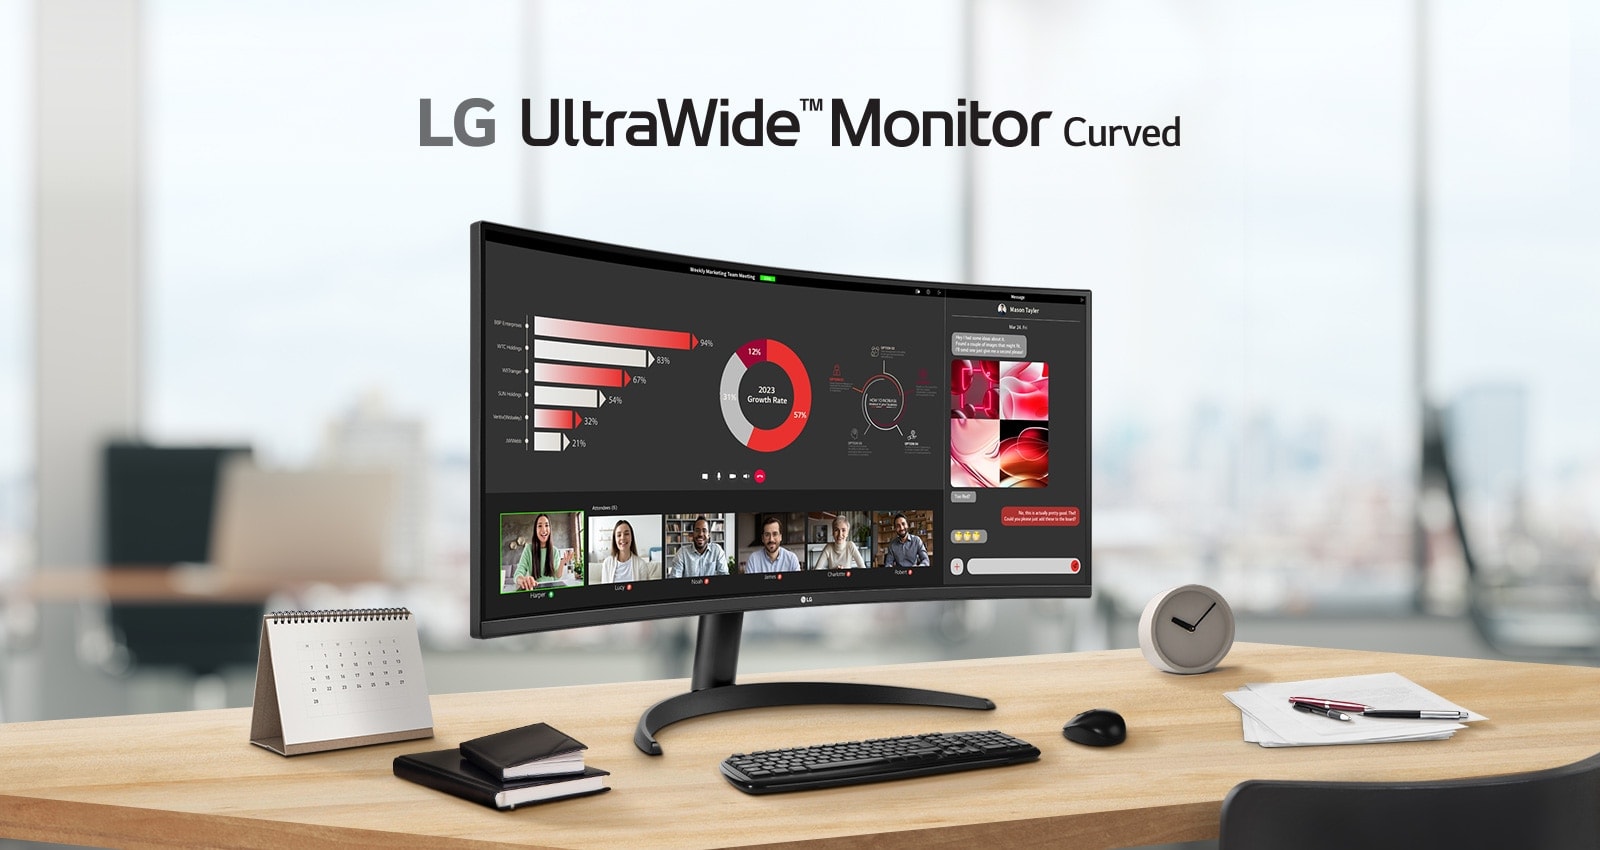 https://www.lg.com/za/images/MN/features/ultrawide-34wr50qc-01-1-lg-ultrawide-monitor-curved-d.jpg